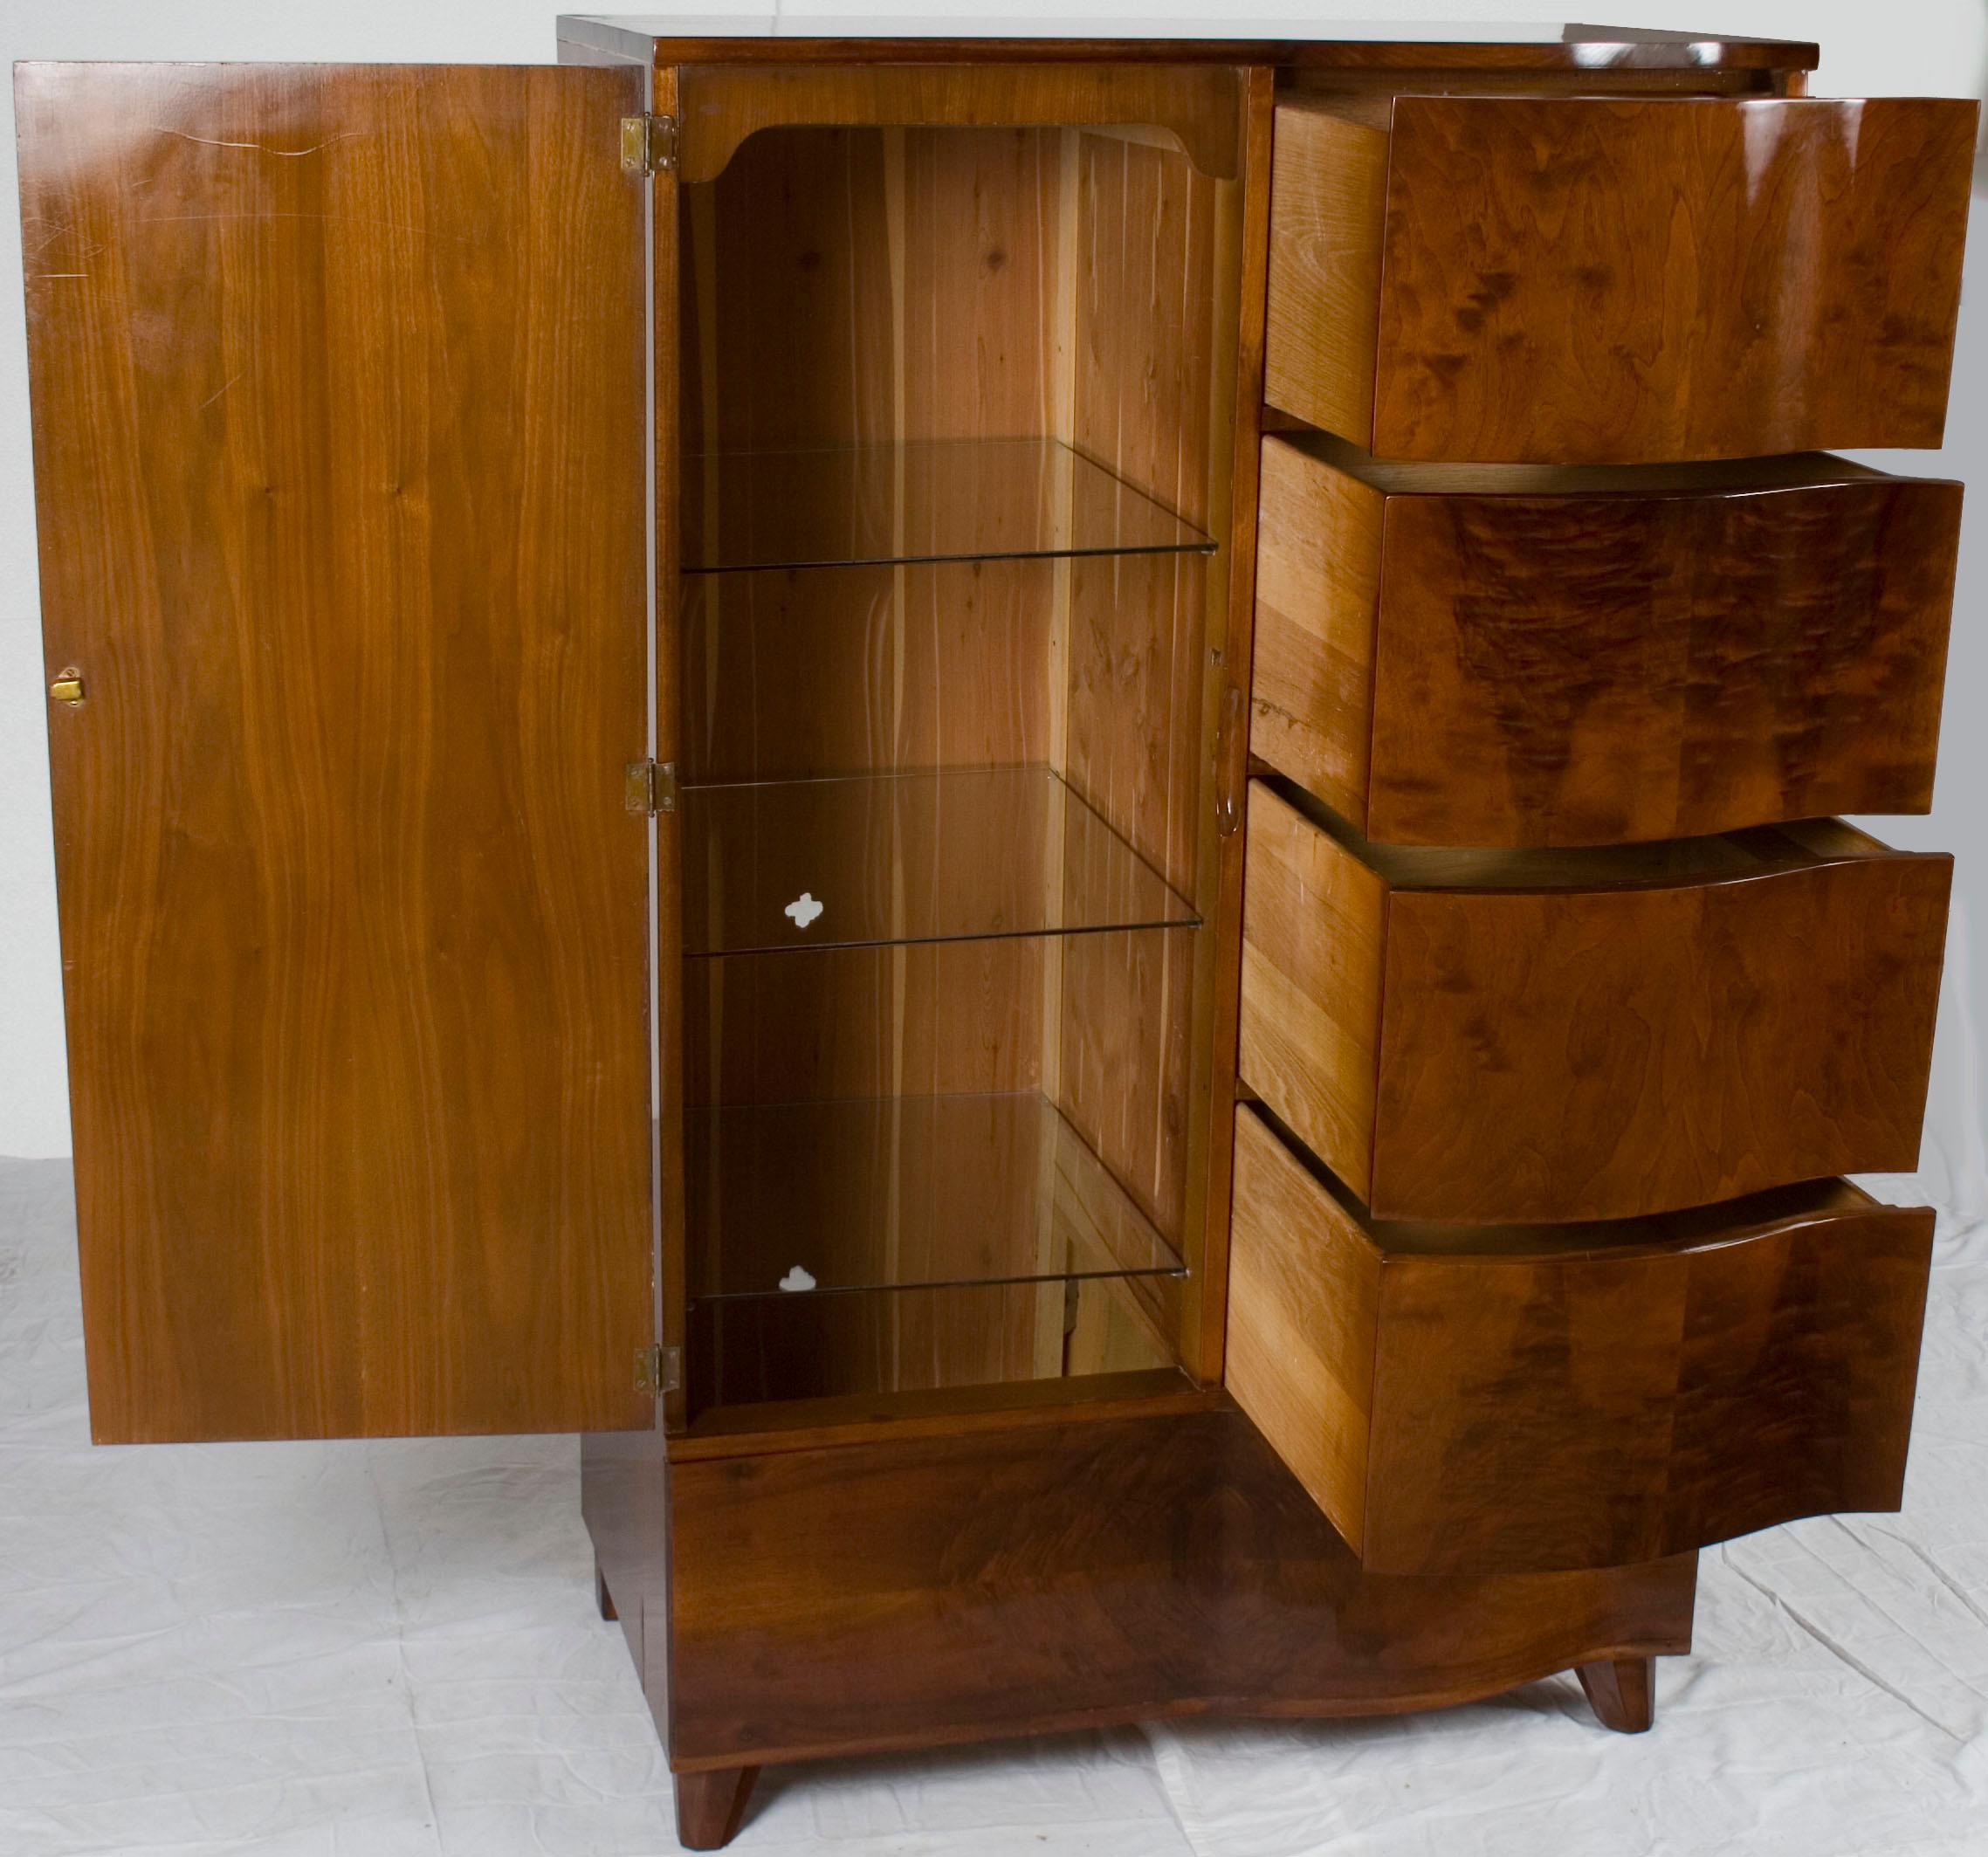 This elegant Art Deco wardrobe was made sometime around the year 1960. Today it remains in great overall condition with plenty of space and functionality.

The selection of mahogany in this armoire is quite rich, with a luxurious complexion and a